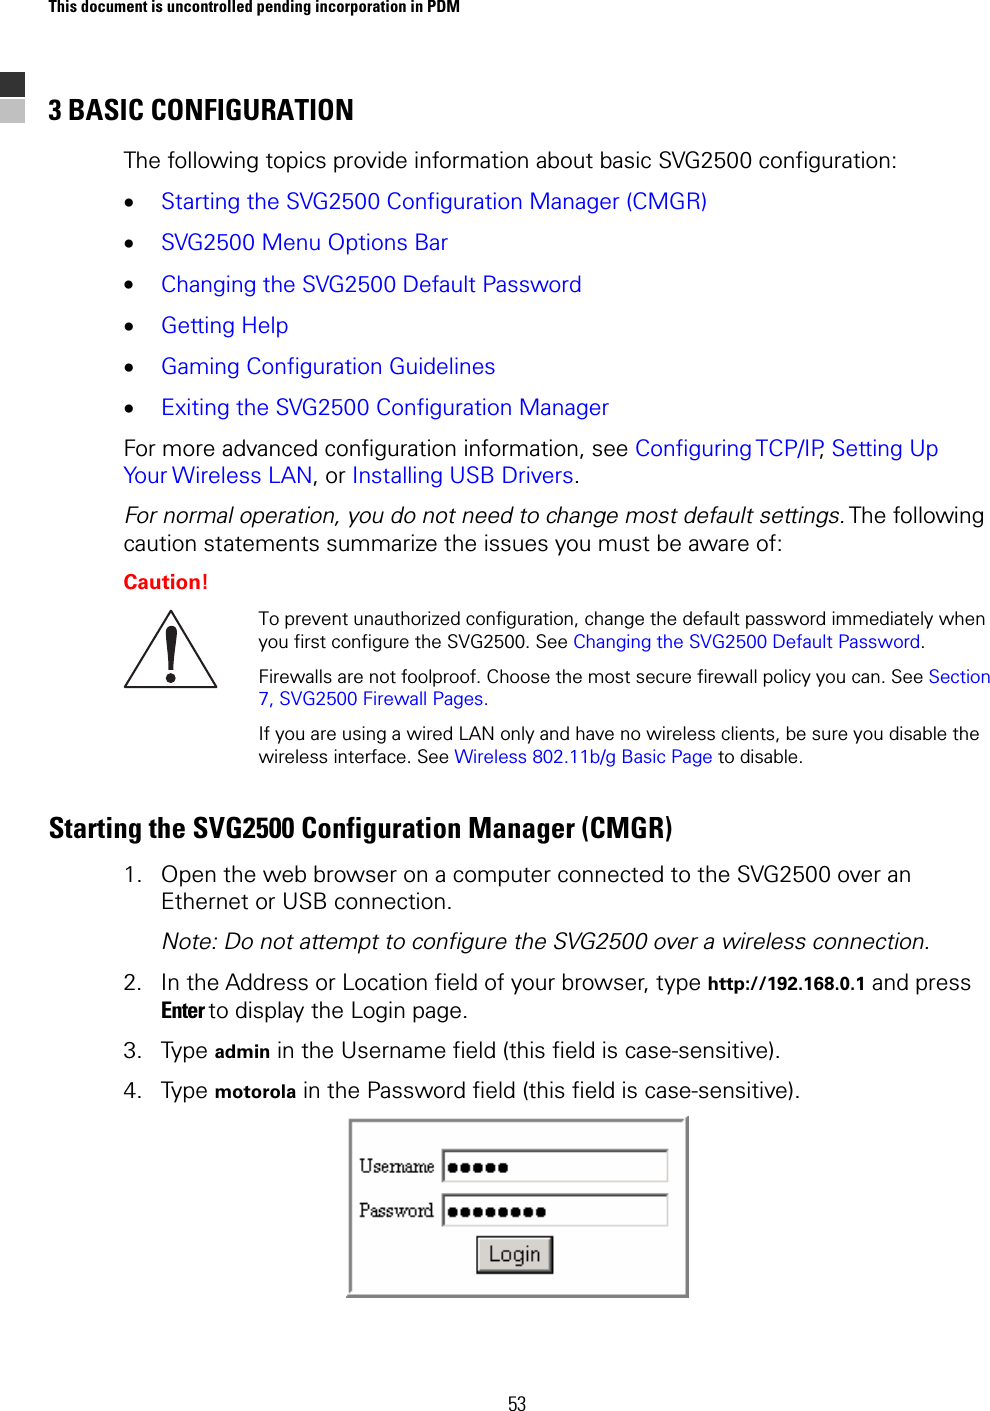 This document is uncontrolled pending incorporation in PDM  53 3 BASIC CONFIGURATION The following topics provide information about basic SVG2500 configuration: • Starting the SVG2500 Configuration Manager (CMGR) • SVG2500 Menu Options Bar • Changing the SVG2500 Default Password • Getting Help • Gaming Configuration Guidelines • Exiting the SVG2500 Configuration Manager For more advanced configuration information, see Configuring TCP/IP, Setting Up Your Wireless LAN, or Installing USB Drivers. For normal operation, you do not need to change most default settings. The  following caution statements summarize the issues you must be aware of: Caution!  To prevent unauthorized configuration, change the default password immediately when you first configure the SVG2500. See Changing the SVG2500 Default Password. Firewalls are not foolproof. Choose the most secure firewall policy you can. See Section 7, SVG2500 Firewall Pages. If you are using a wired LAN only and have no wireless clients, be sure you disable the wireless interface. See Wireless 802.11b/g Basic Page to disable. Starting the SVG2500 Configuration Manager (CMGR) 1. Open the web browser on a computer connected to the SVG2500 over an Ethernet or USB connection. Note: Do not attempt to configure the SVG2500 over a wireless connection. 2. In the Address or Location field of your browser, type http://192.168.0.1 and press Enter to display the Login page. 3. Type admin in the Username field (this field is case-sensitive). 4. Type motorola in the Password field (this field is case-sensitive).  